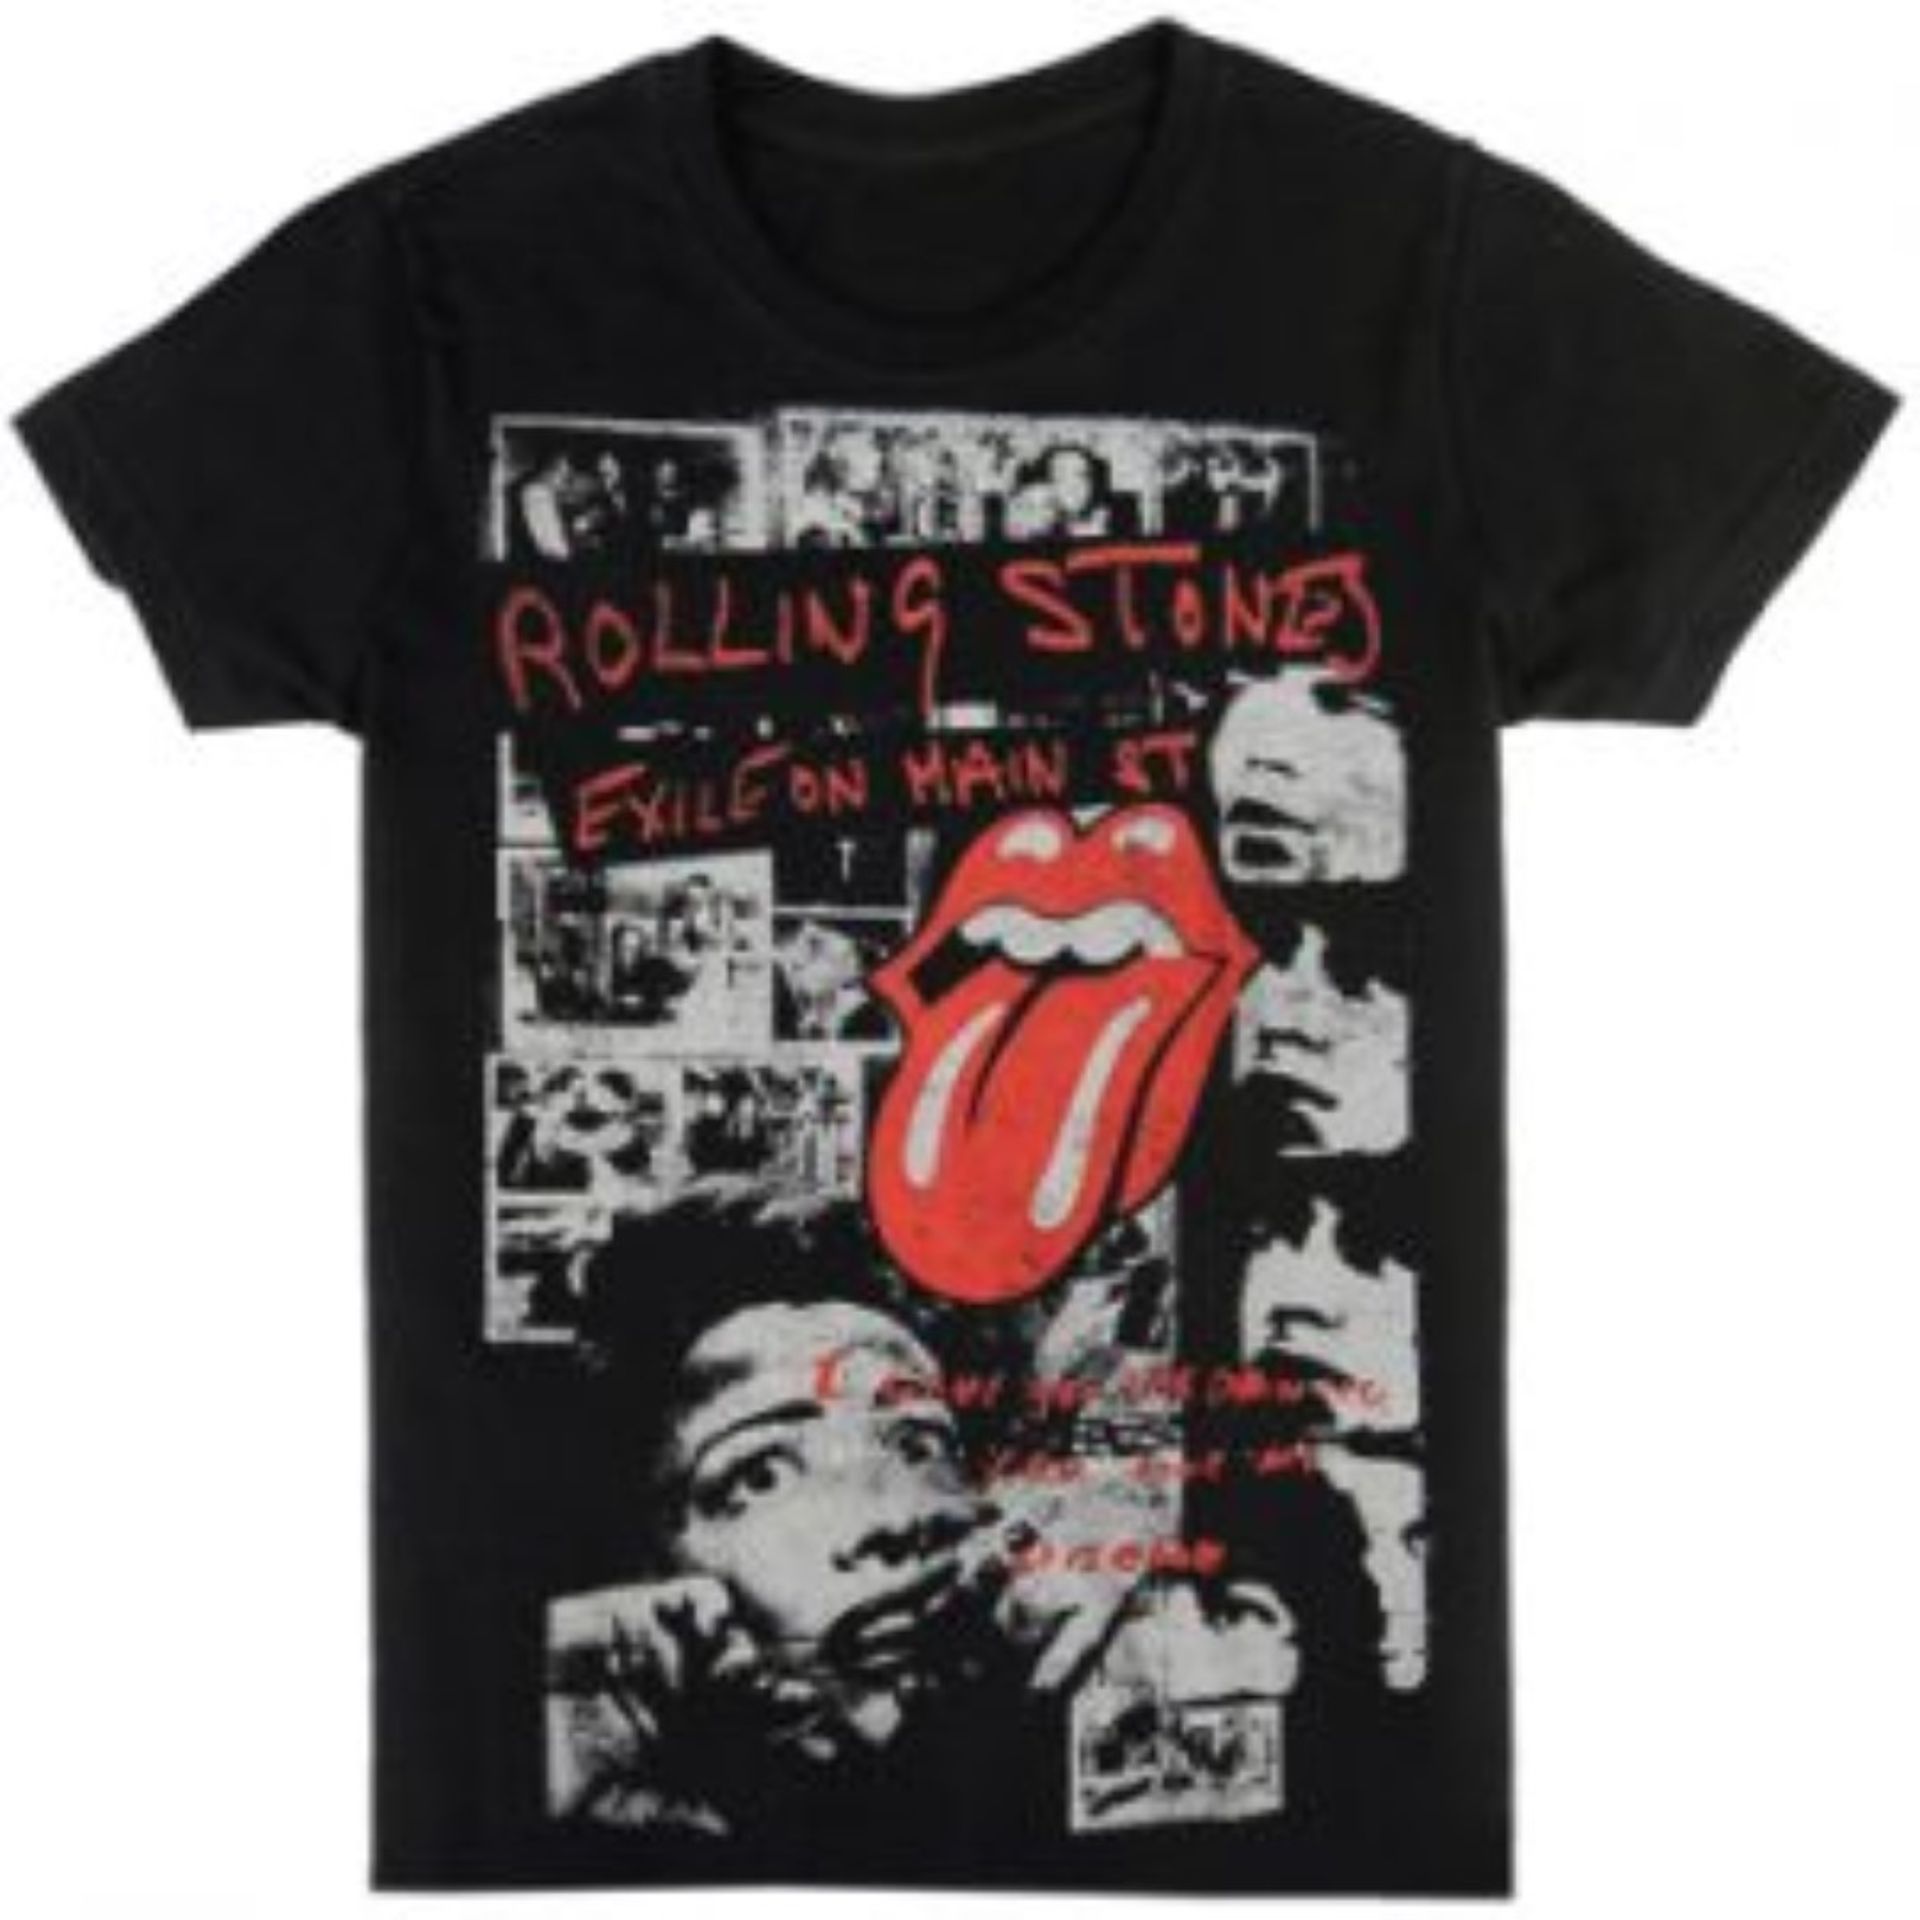 3 x THE ROLLING STONES Various Designs Short and Long Sleeve T-Shirts - Size: Large - Officially - Image 4 of 7